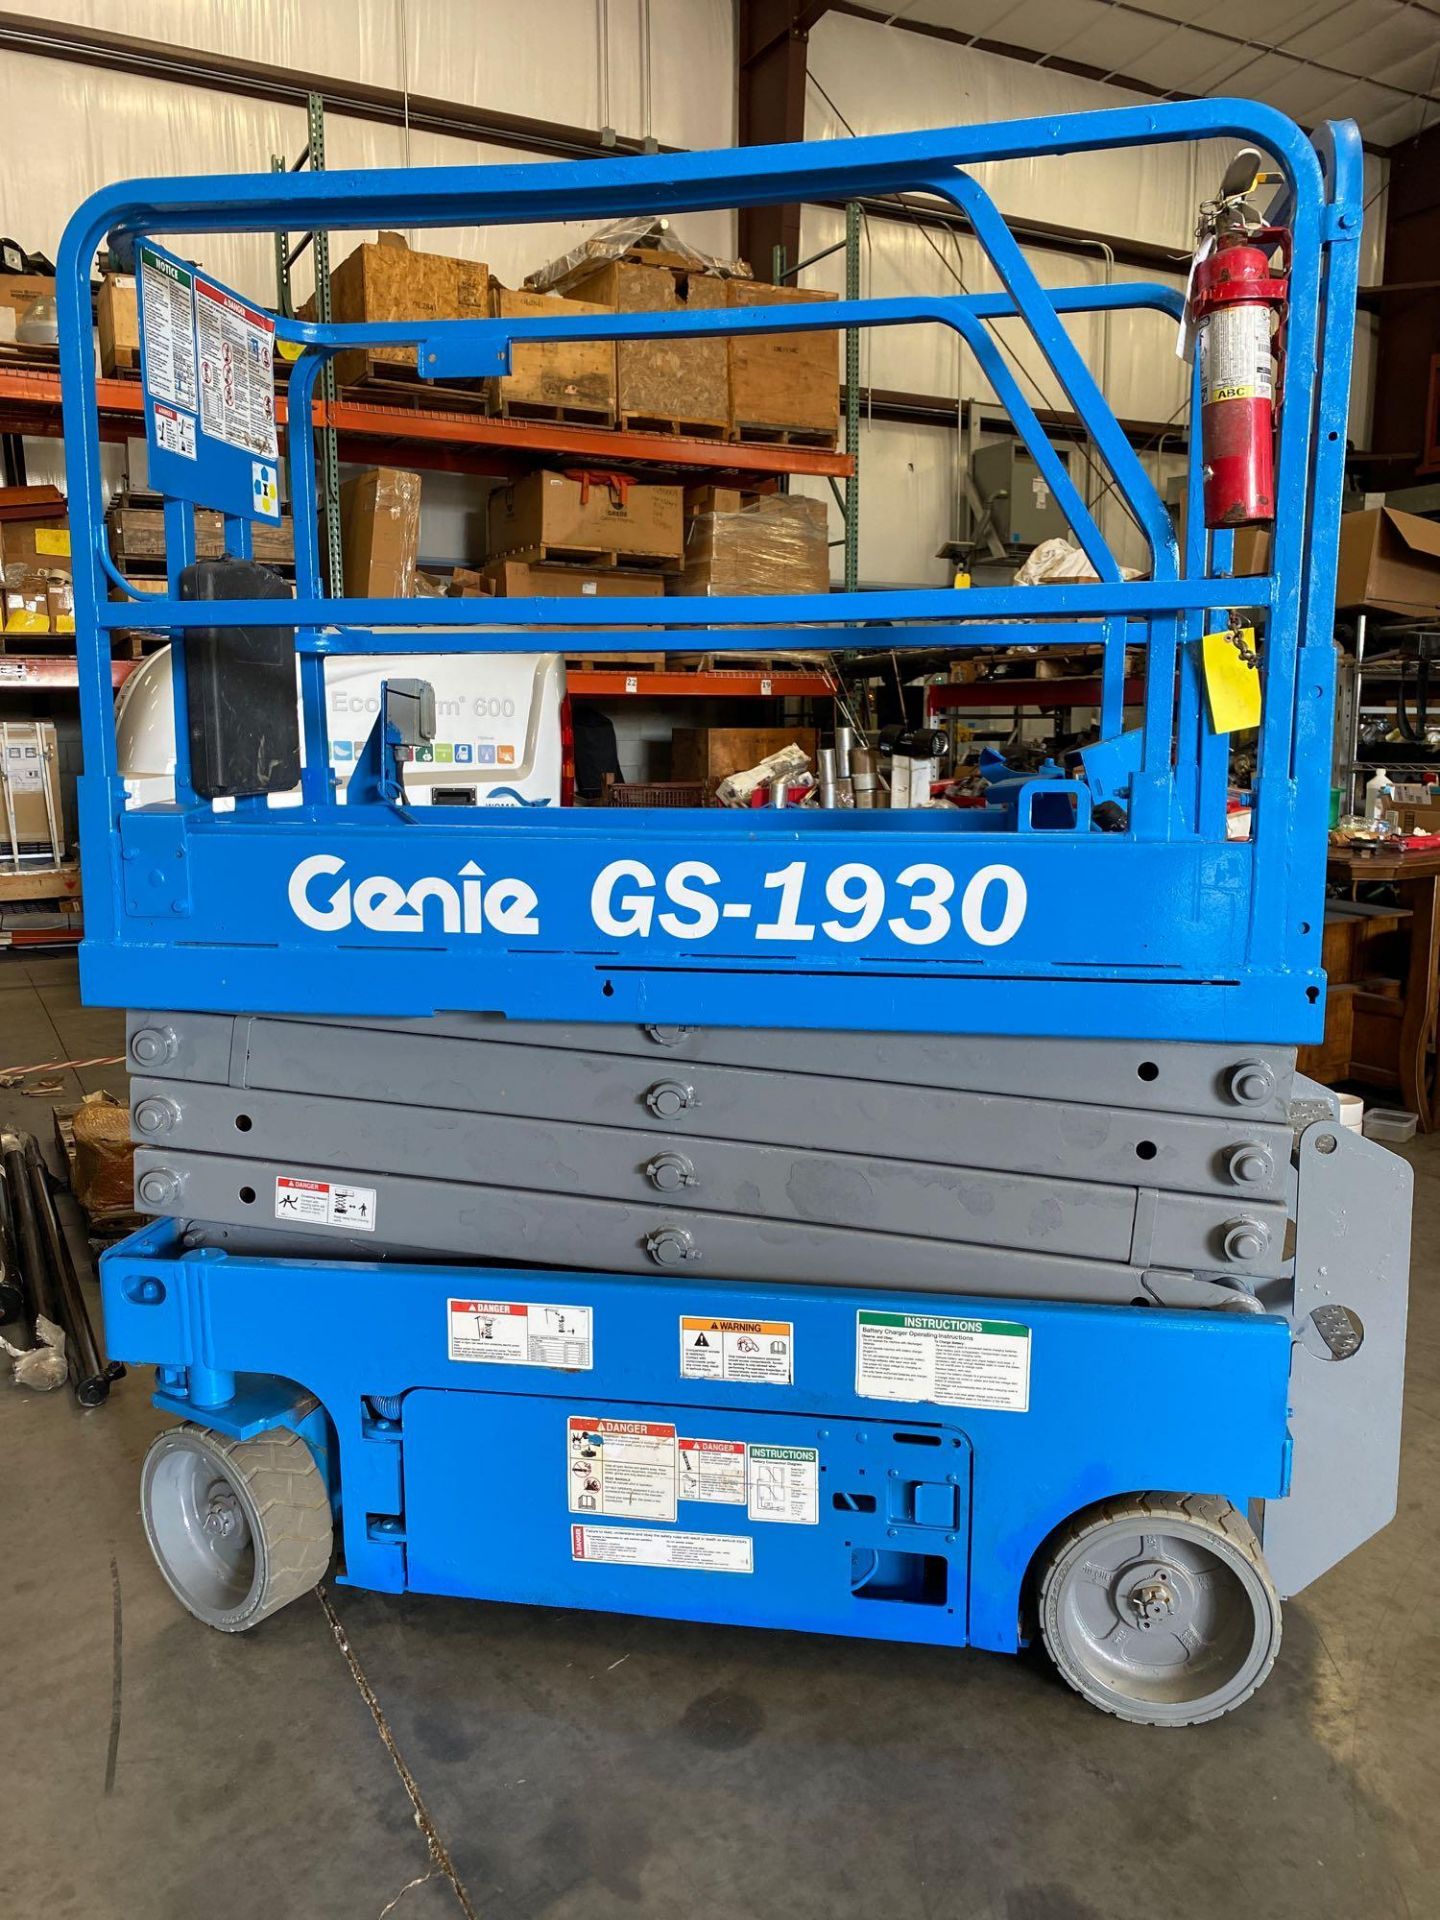 2013 GENIE GS-1930 ELECTRIC SCISSOR LIFT, 110 HOURS SHOWING, BUILT IN BATTERY CHARGER - Image 2 of 6